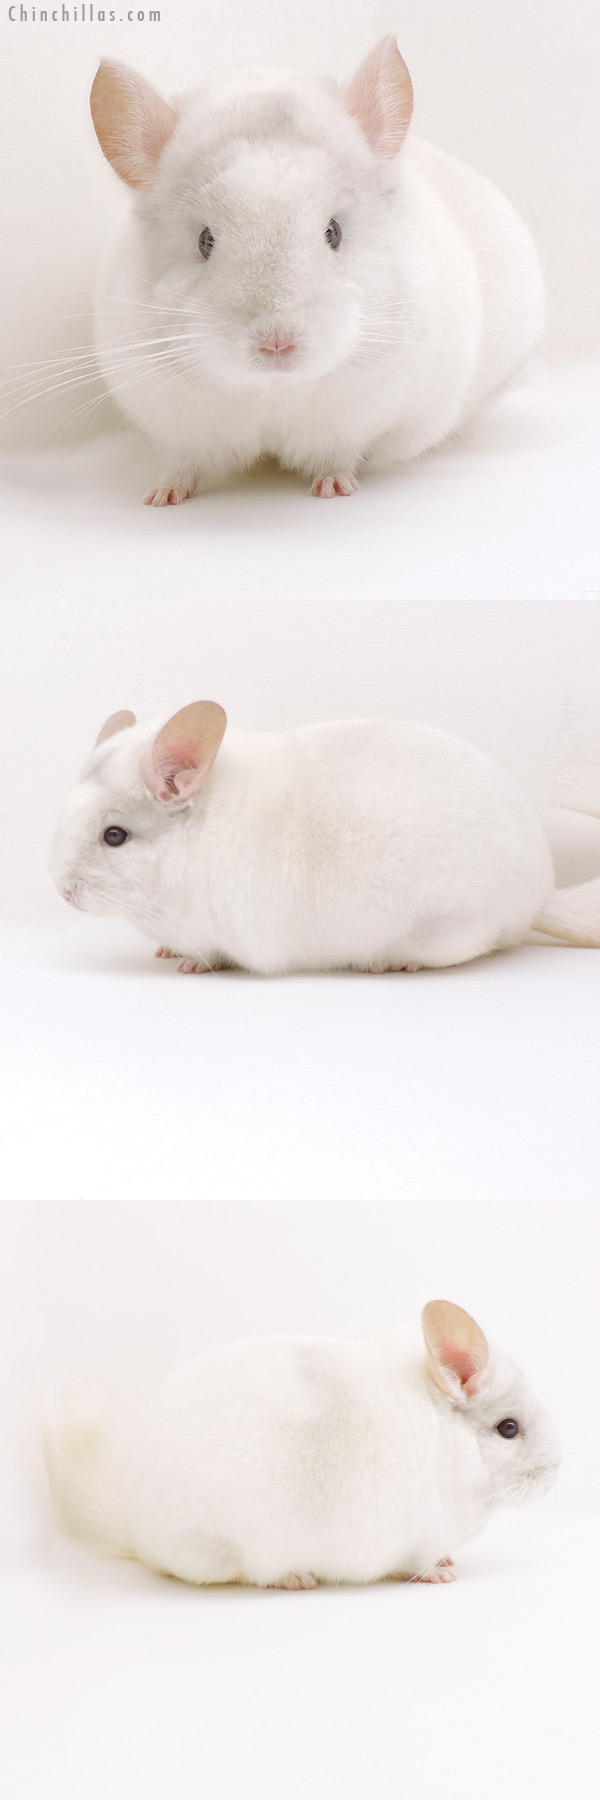 Chinchilla or related item offered for sale or export on Chinchillas.com - 19250 Blocky Herd Improvement Quality Pink White Male Chinchilla